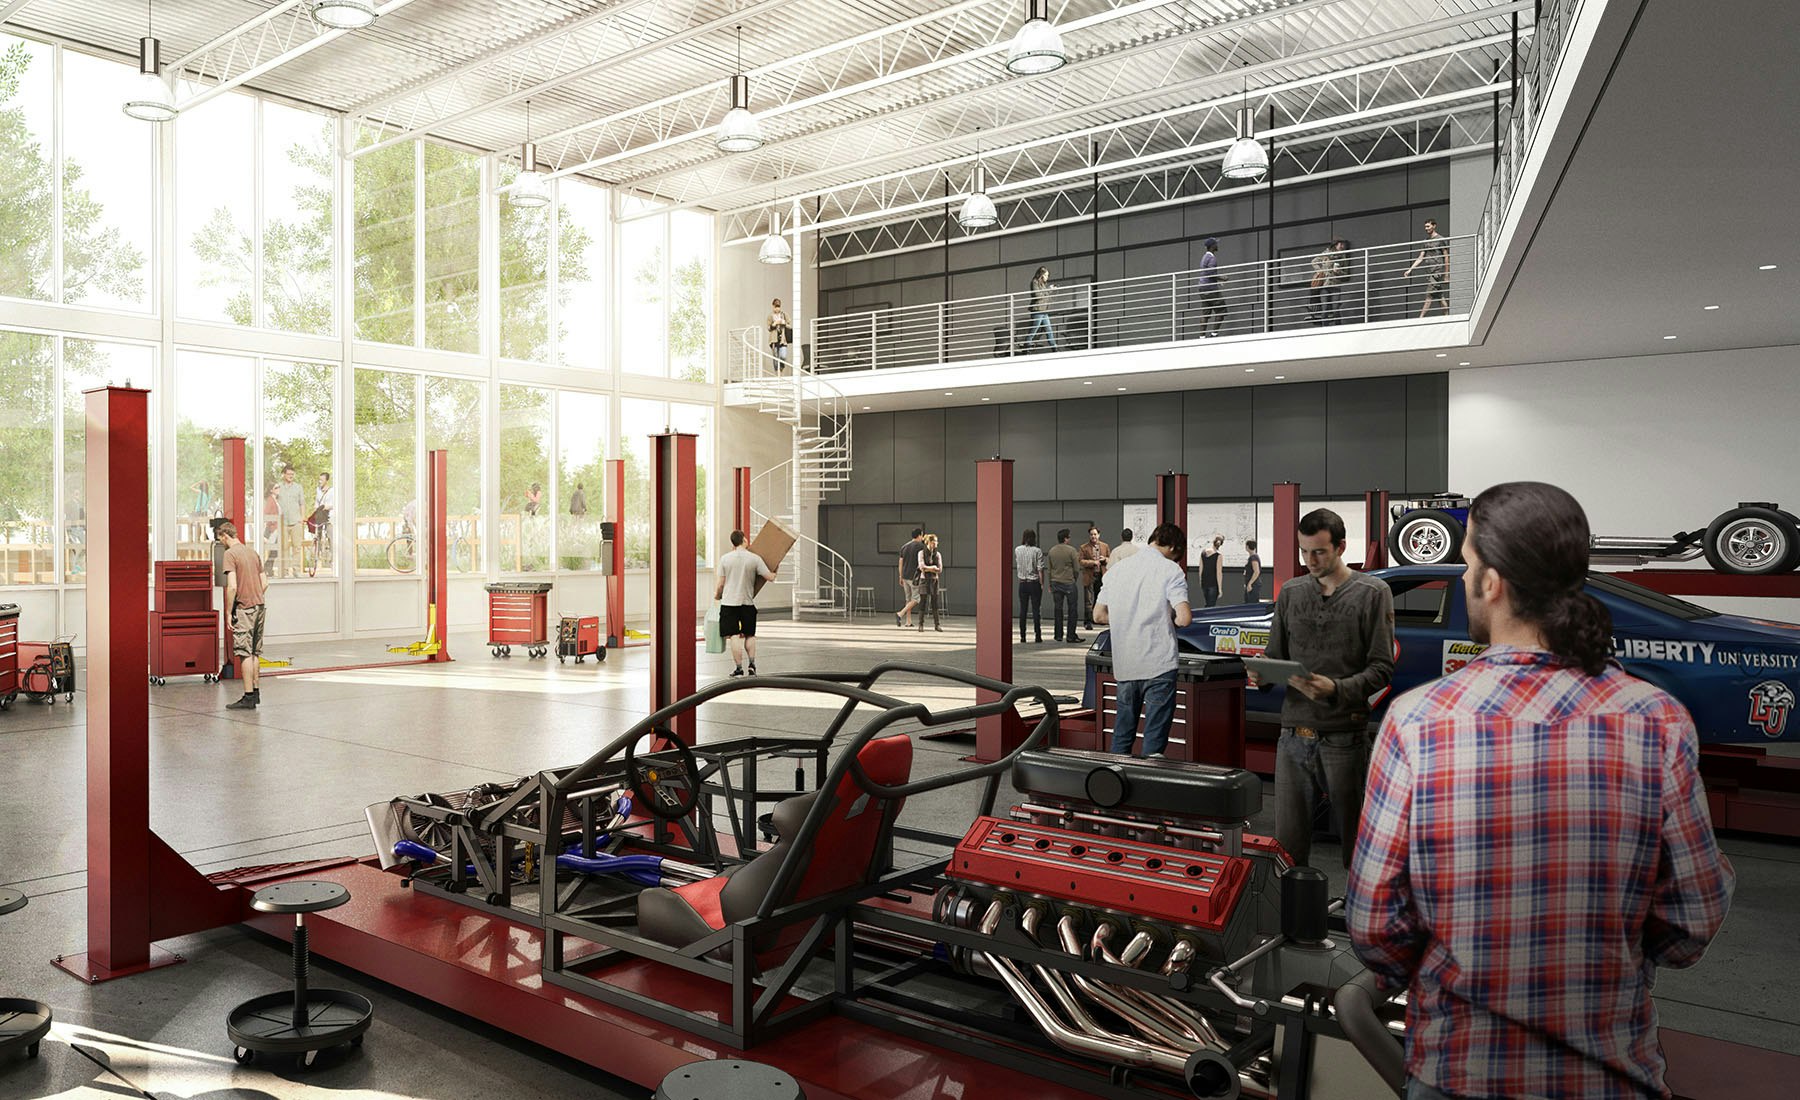  The building also includes a Motorsports wing for vocational support and training.